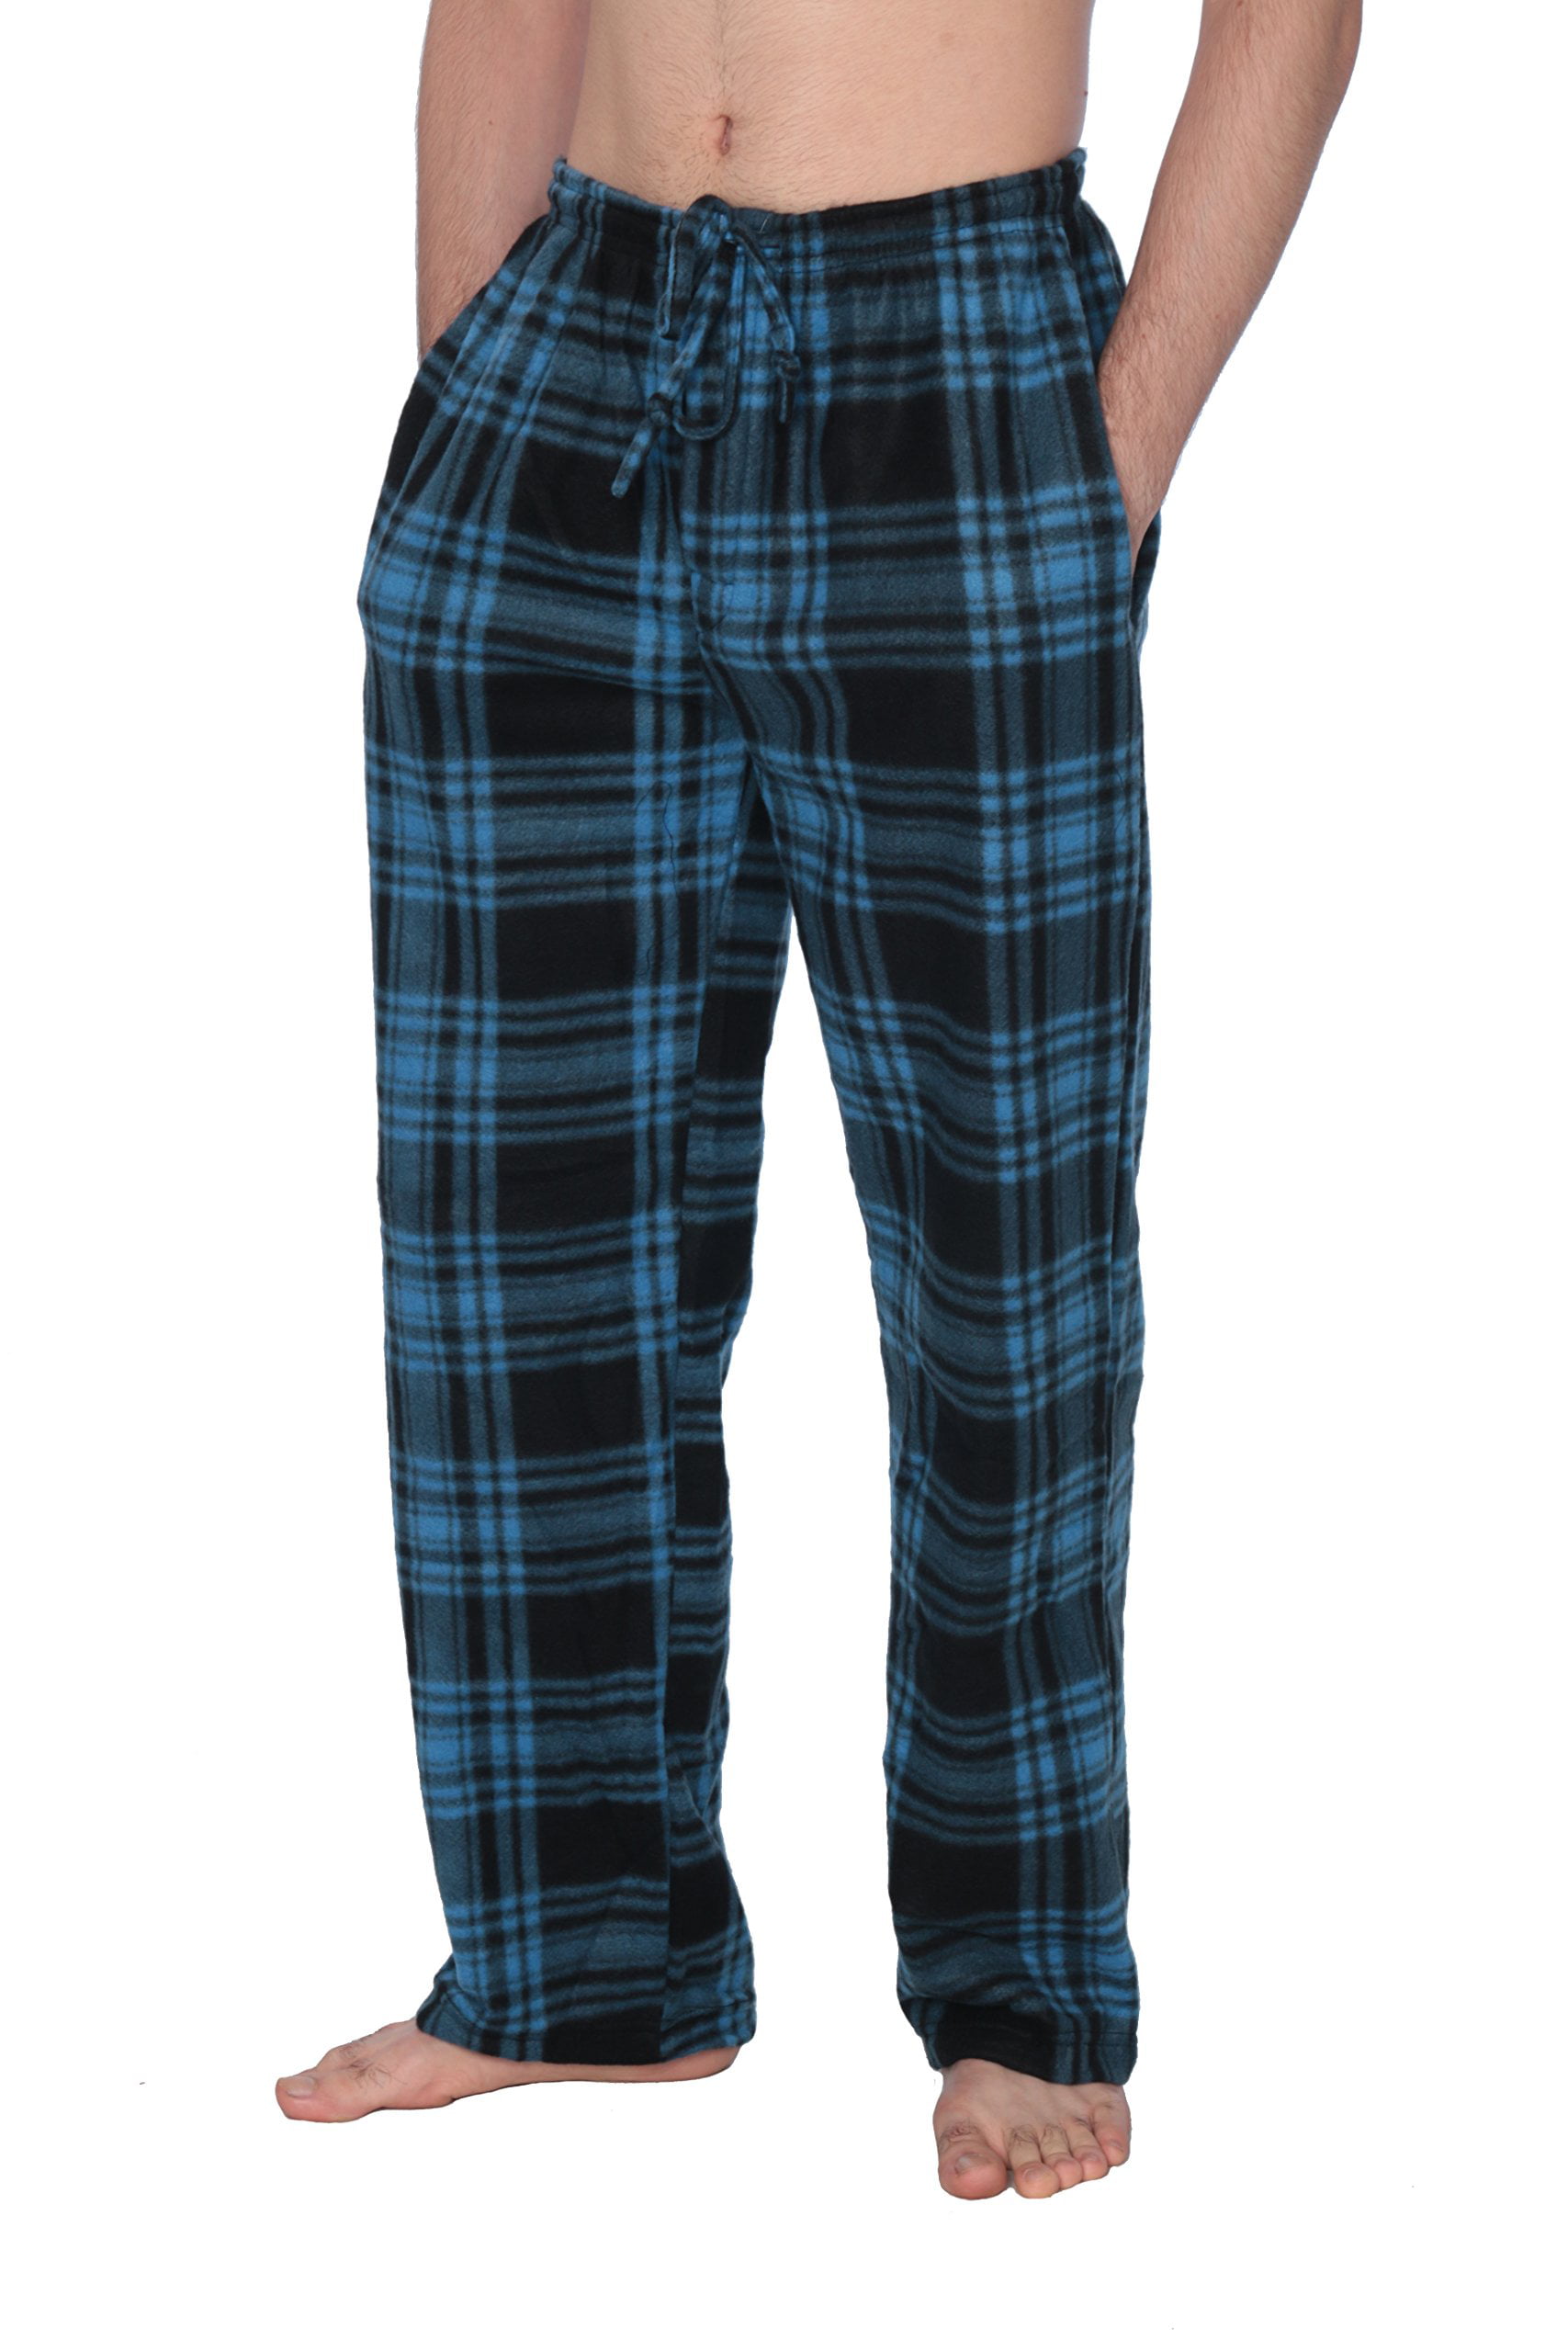 Men’s 1 Pack Fleece Lounge Pants NAVY L  New without tag